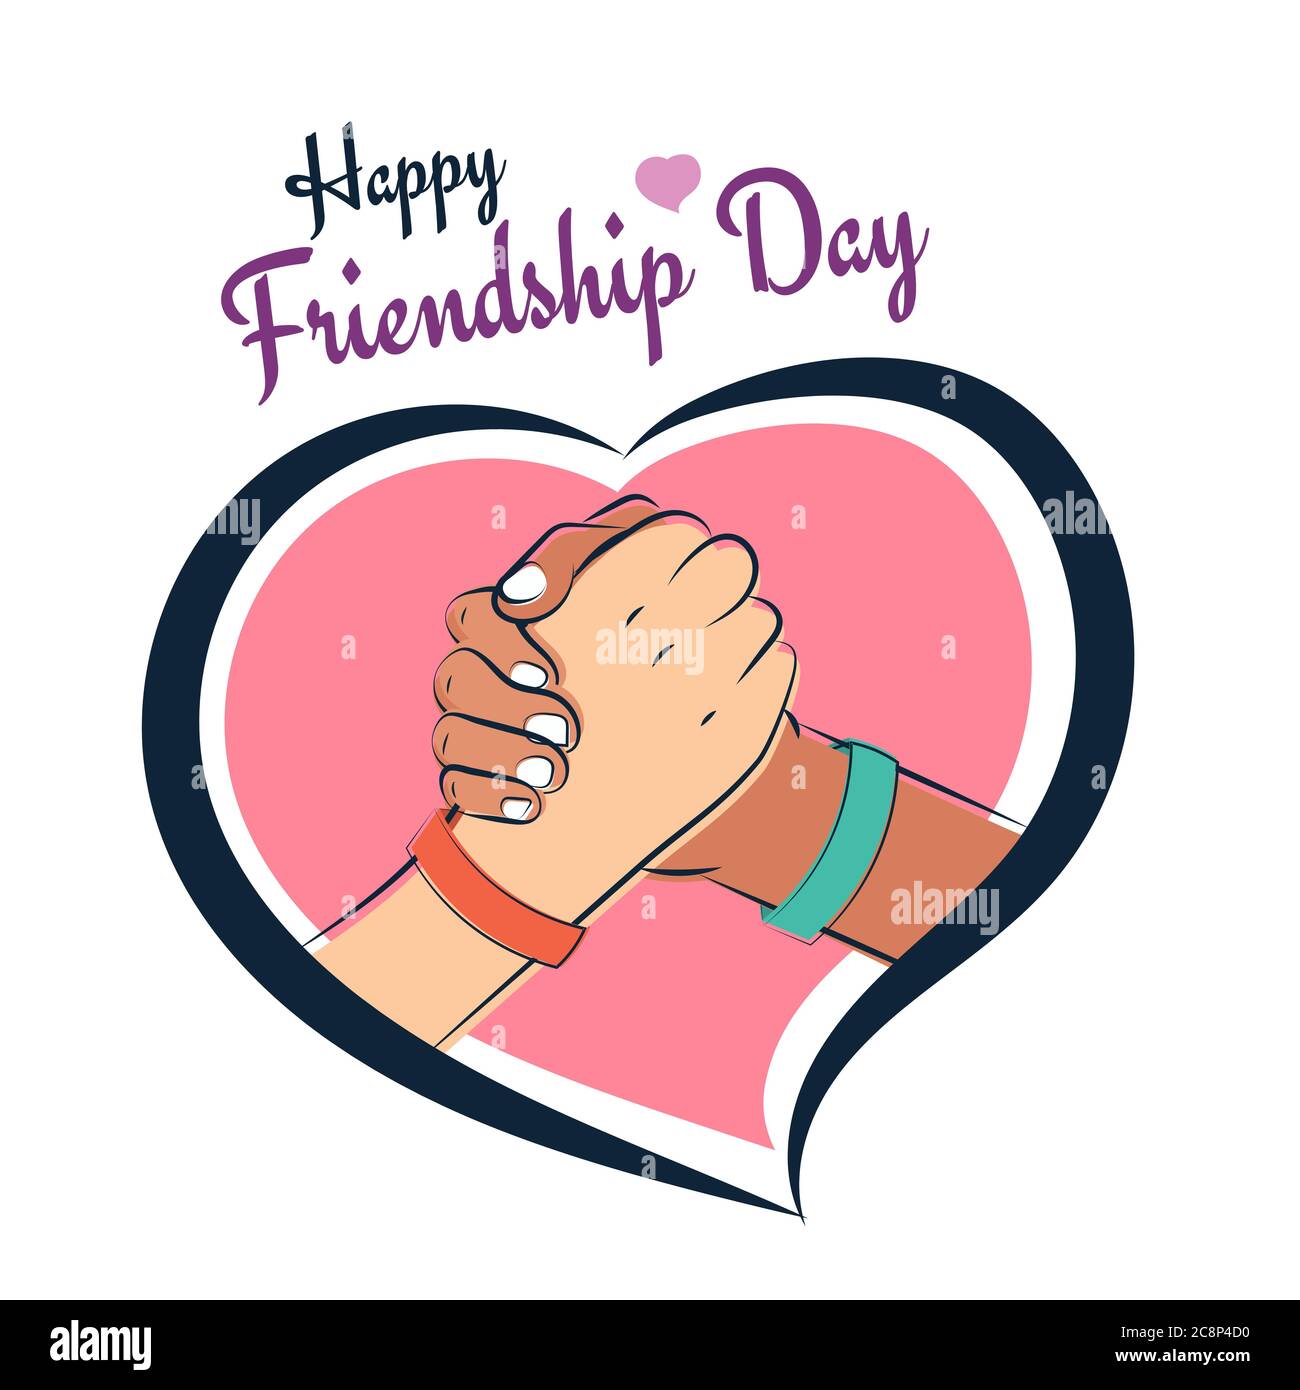 Happy Friendship Day, friends shake hands with love and heart ...